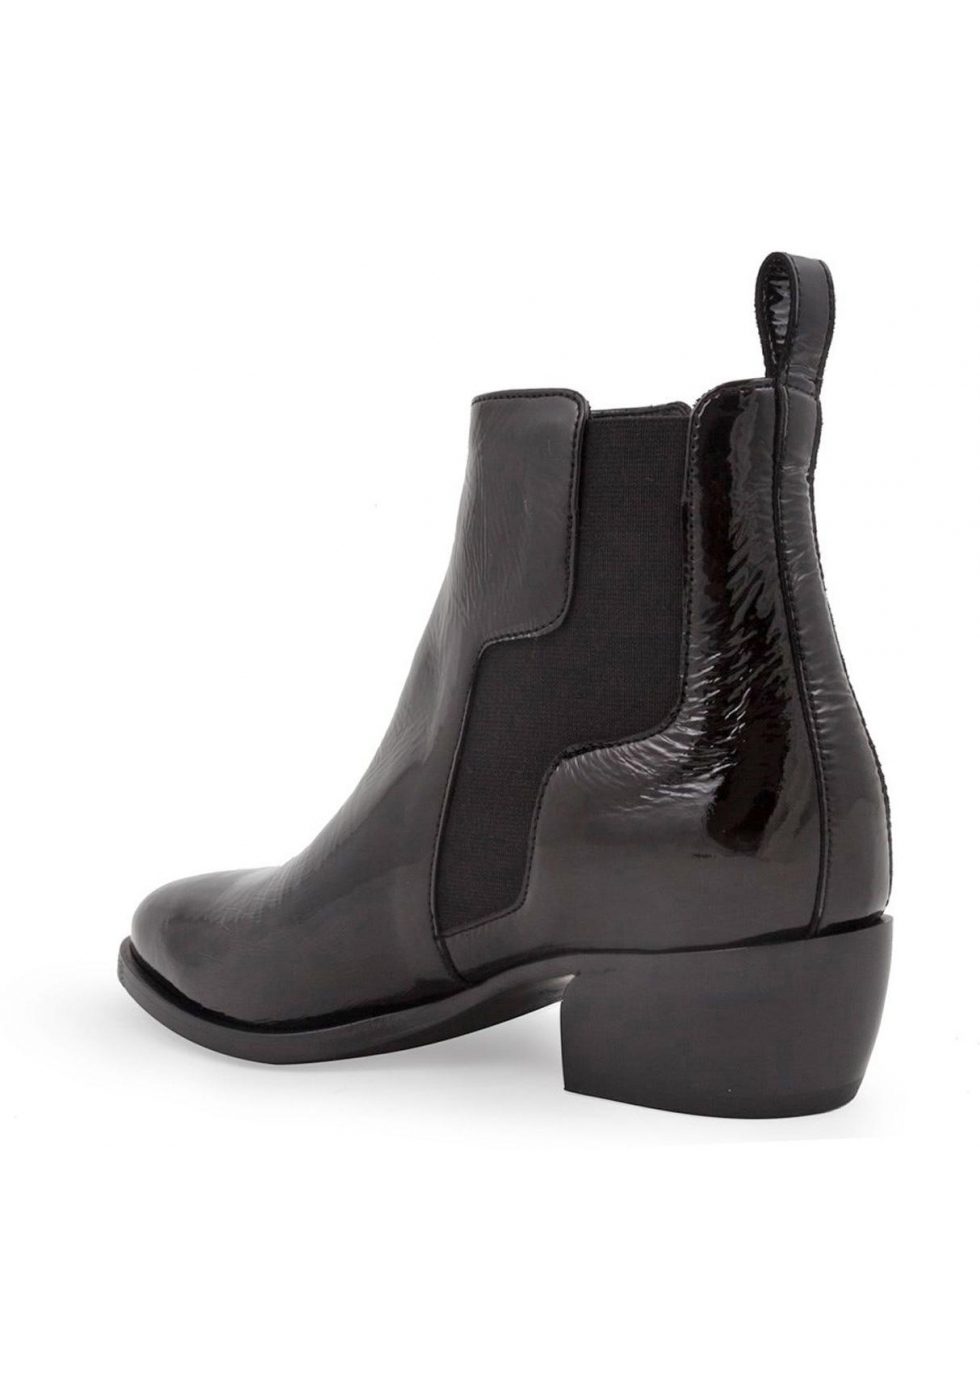 Pierre Hardy women&#39;s ankle boots in black patent leather - Italian Boutique